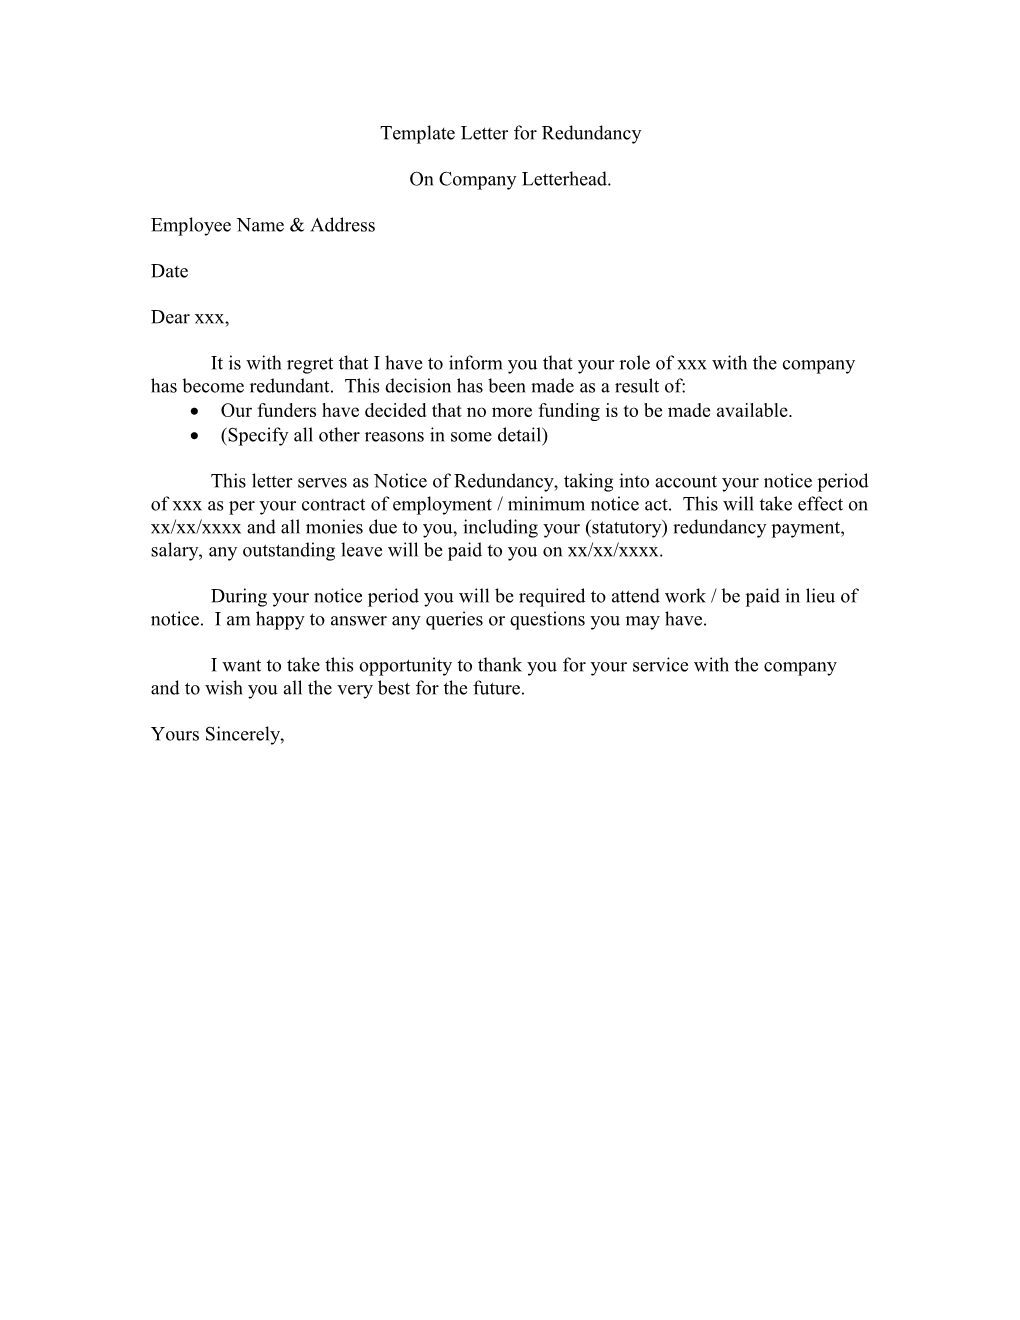 Template Letter for Lay-Off